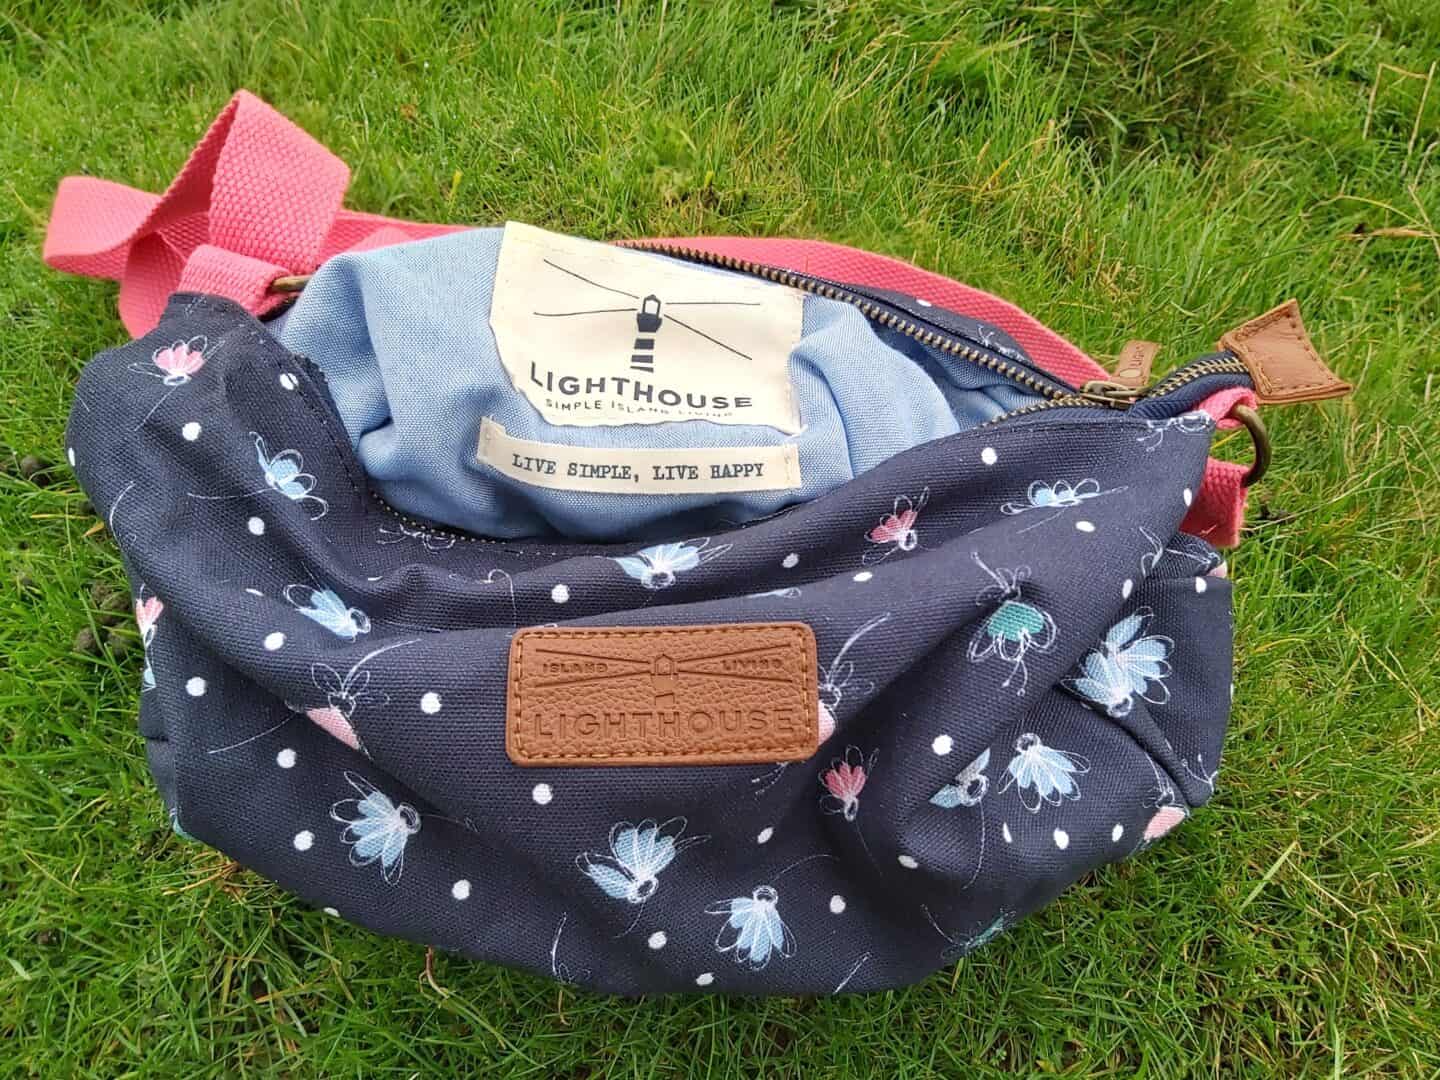 Night Sky Floral Cross Over Bag from Lighthouse Clothing open with label showing on inside